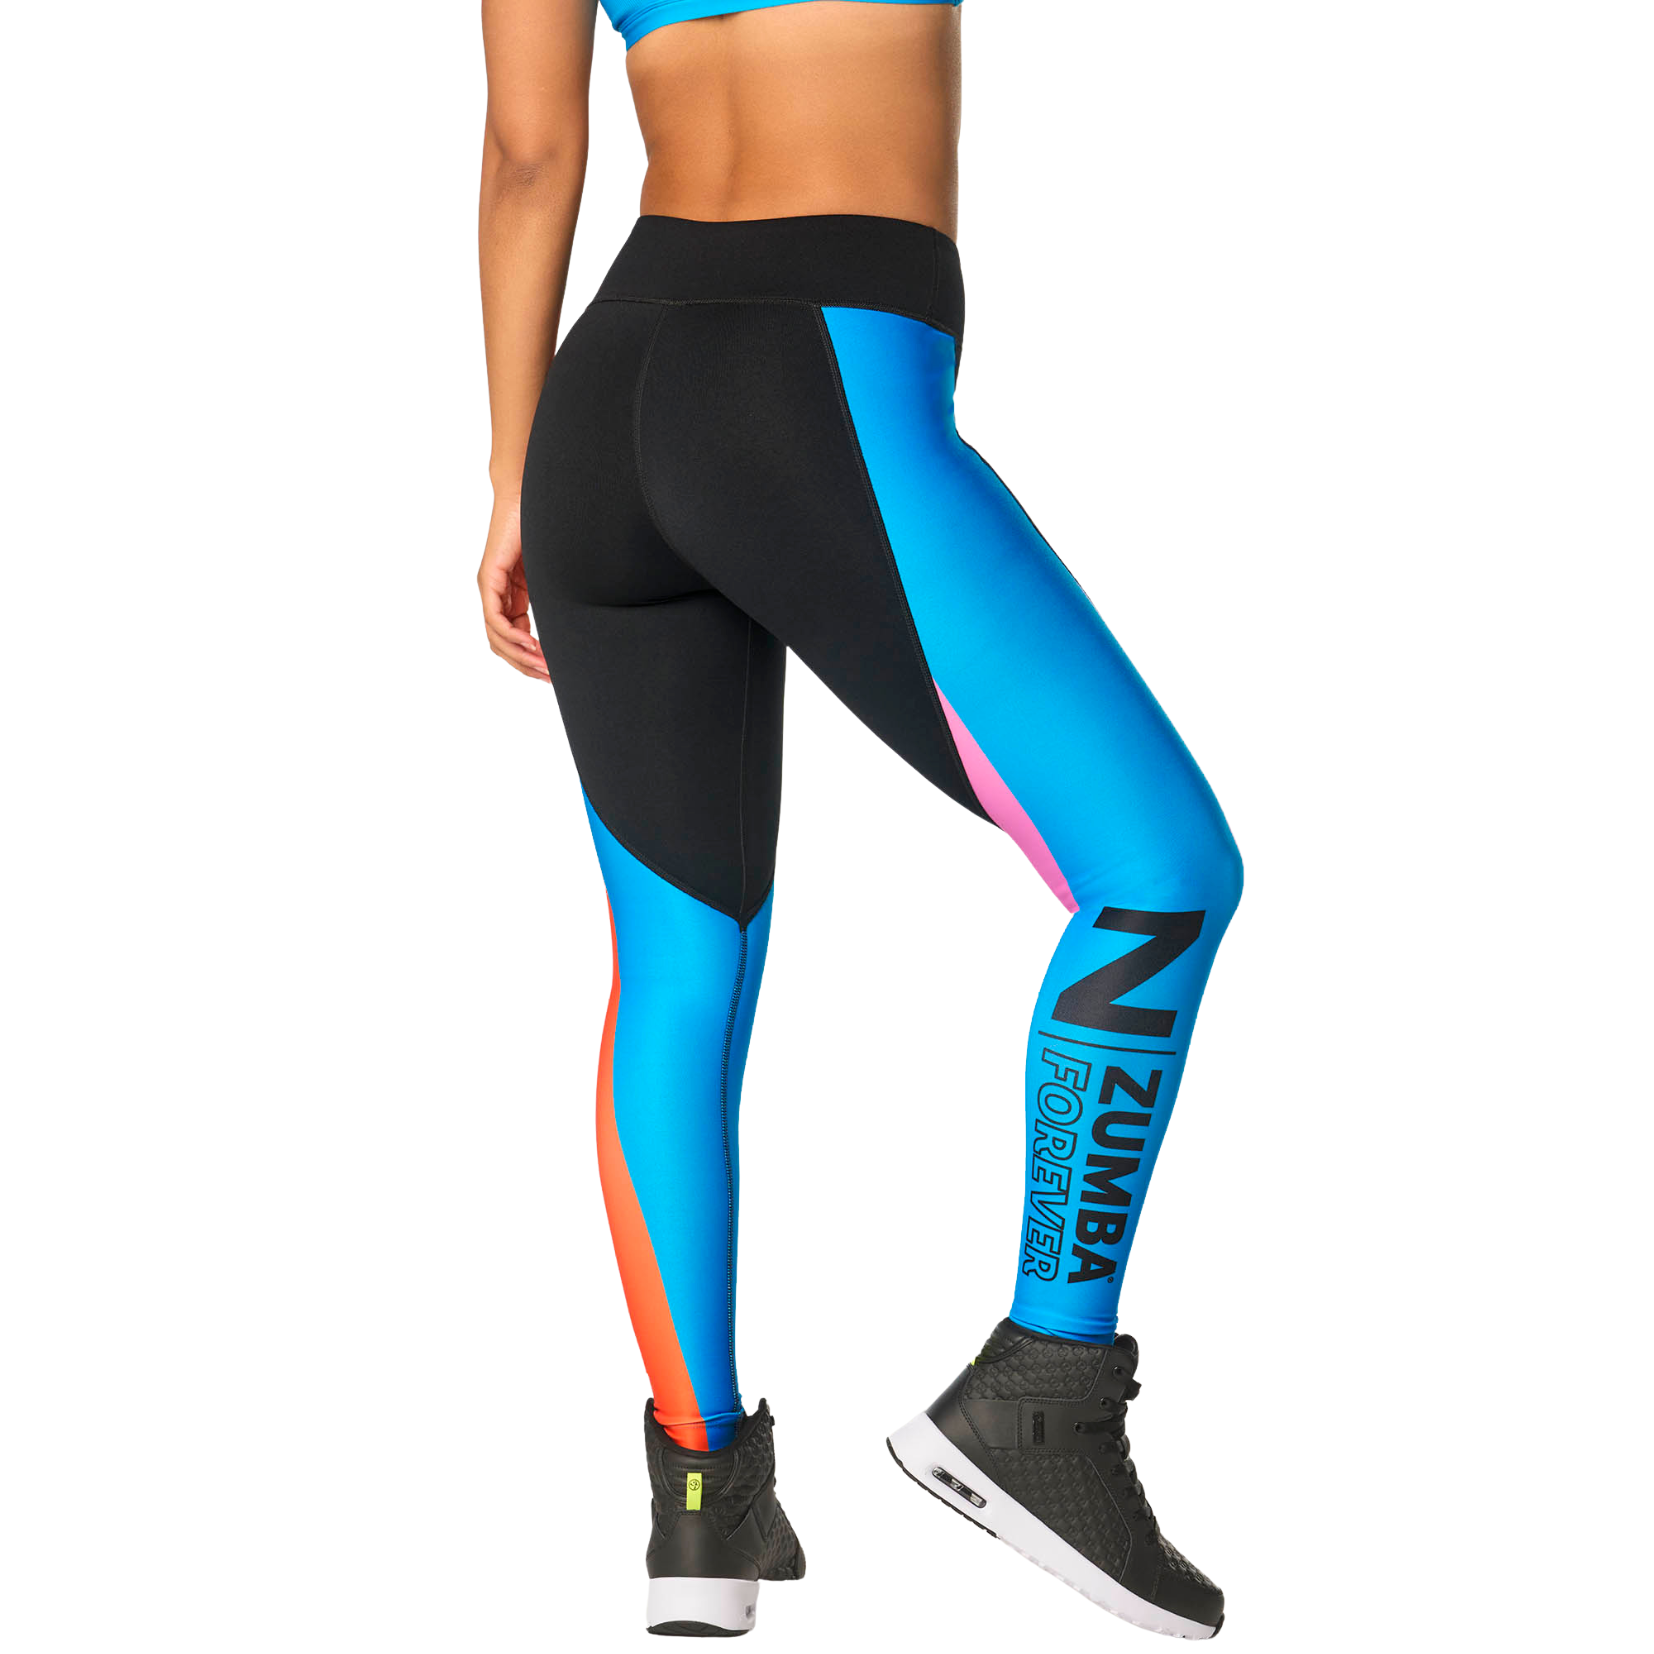 Destination Zumba Ankle Leggings (Special Order)